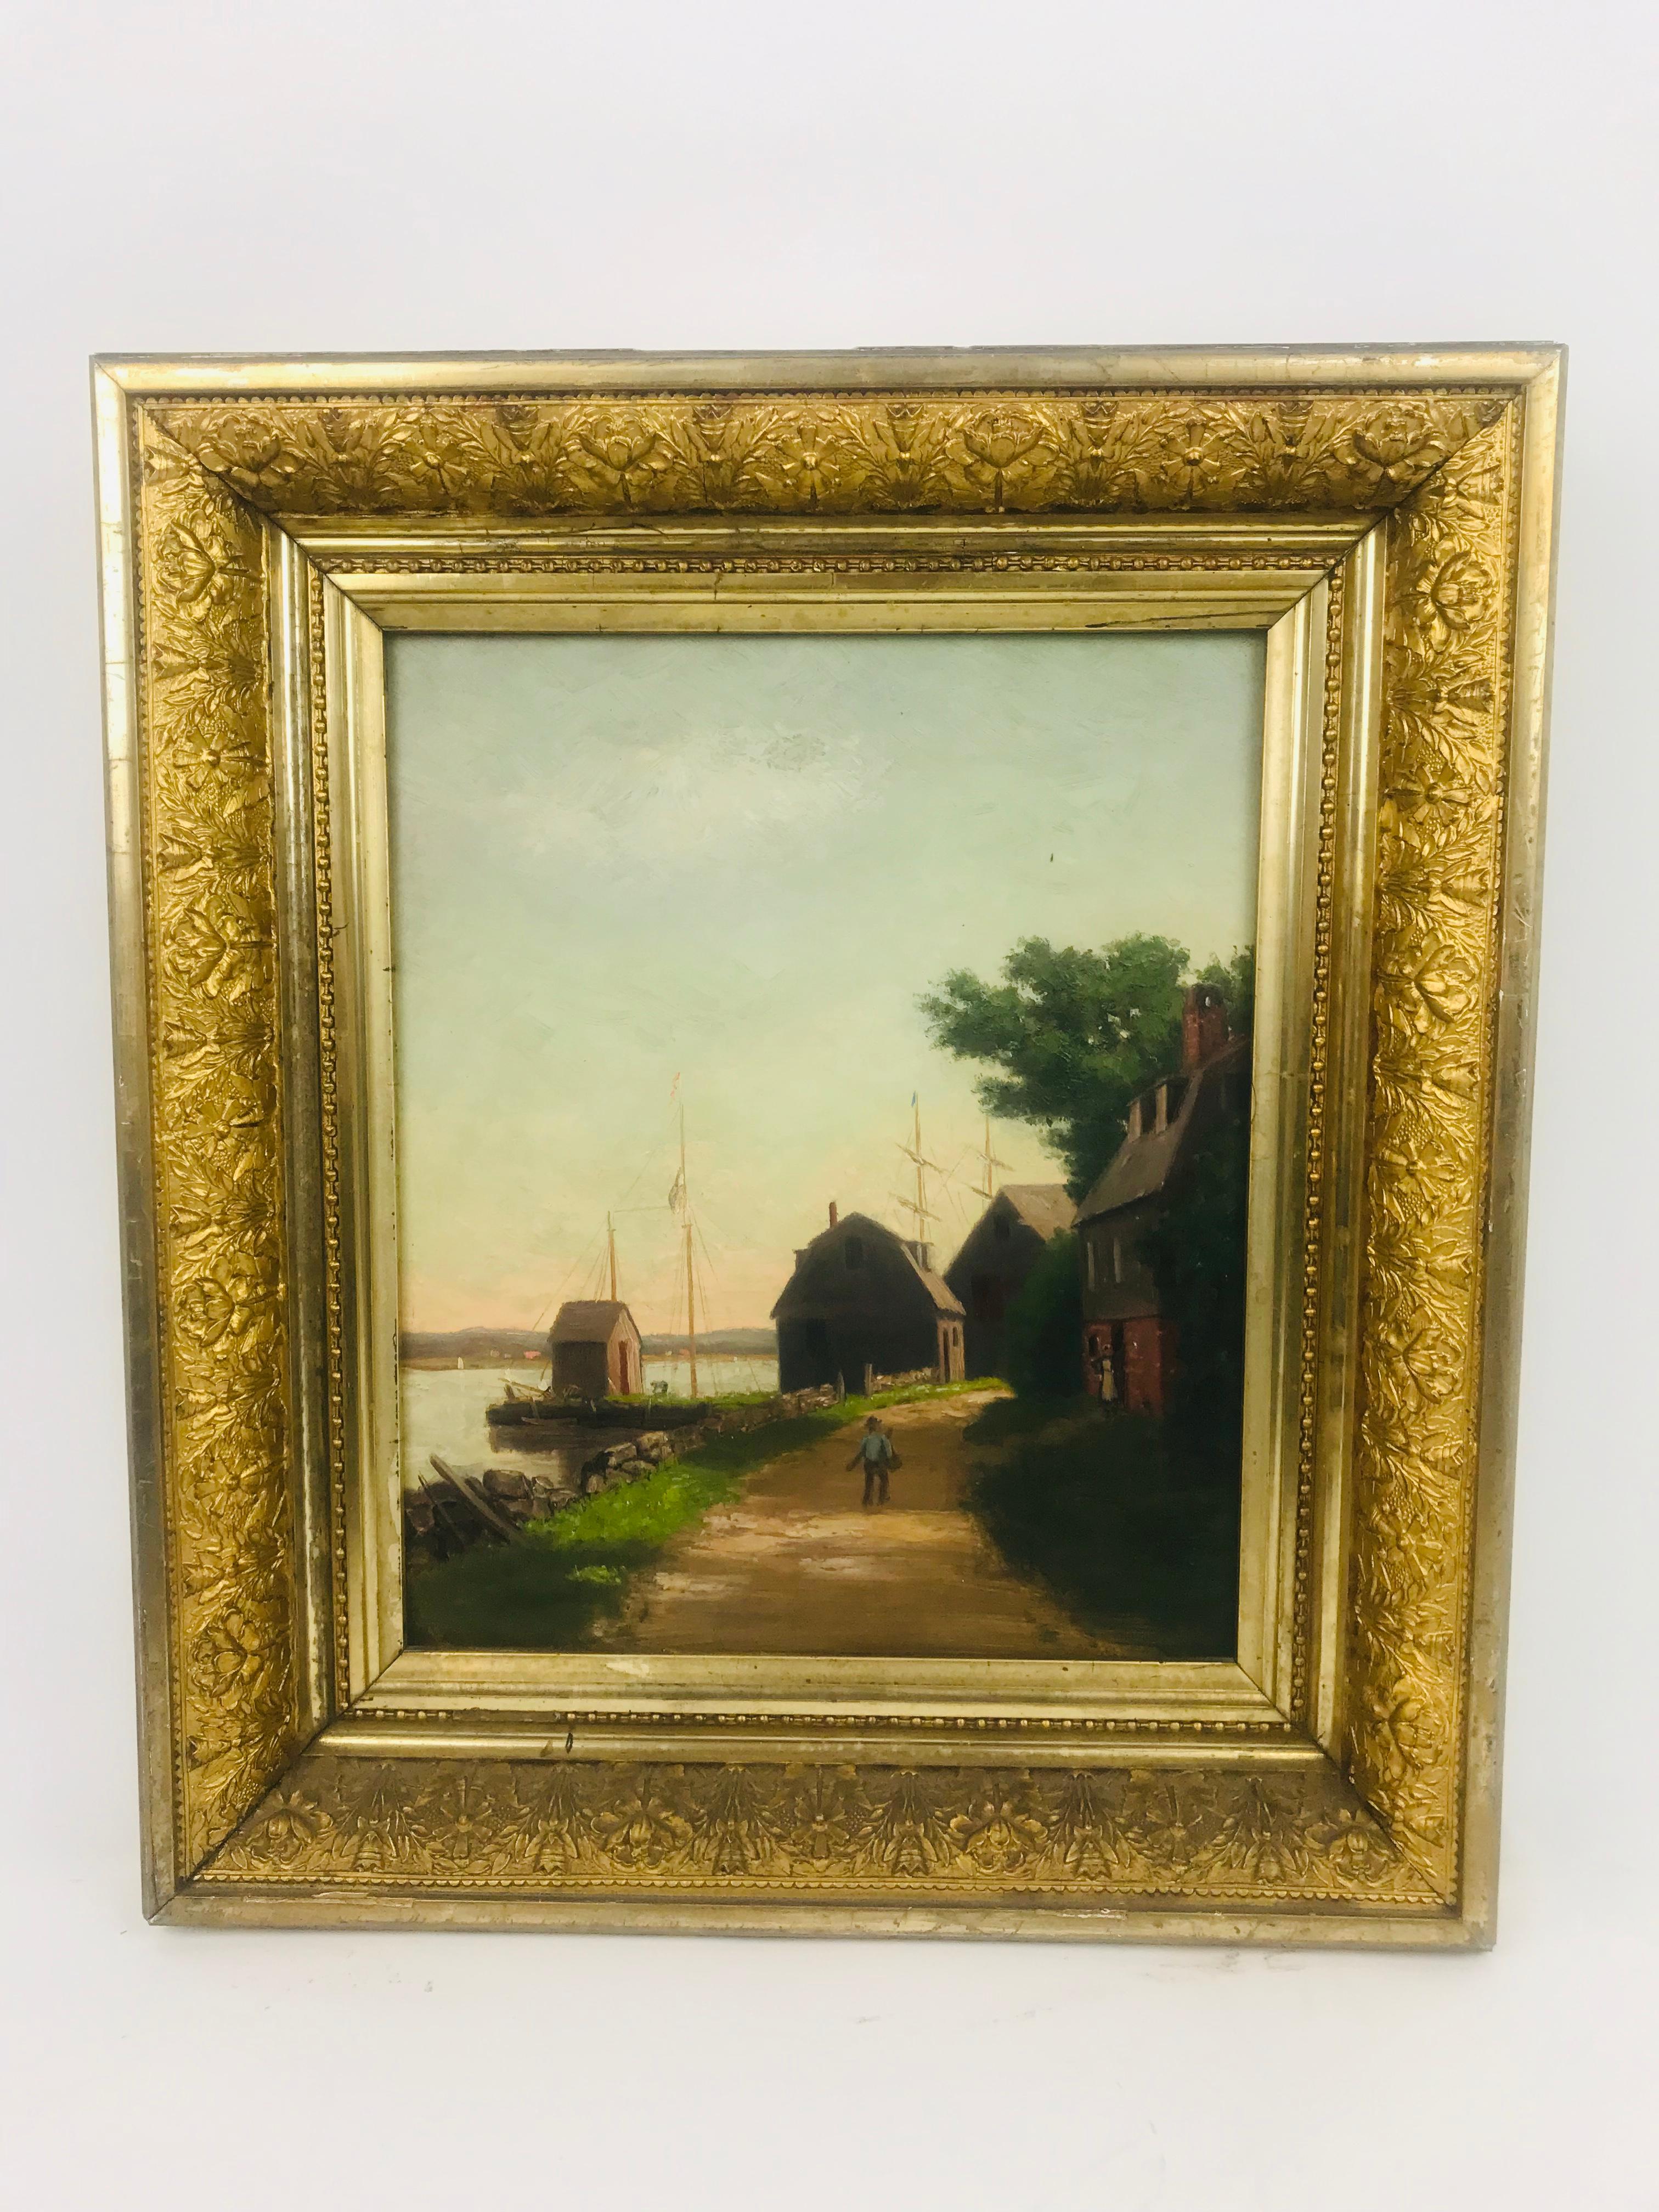 A scenic and realistic oil painting by S.L. Brackett. A Fairweather scene captures the beauty of the coast of a small seaside town. A man walks the path alone with arms at his side as if absorbing the beauty of it all through his finger tips, like a